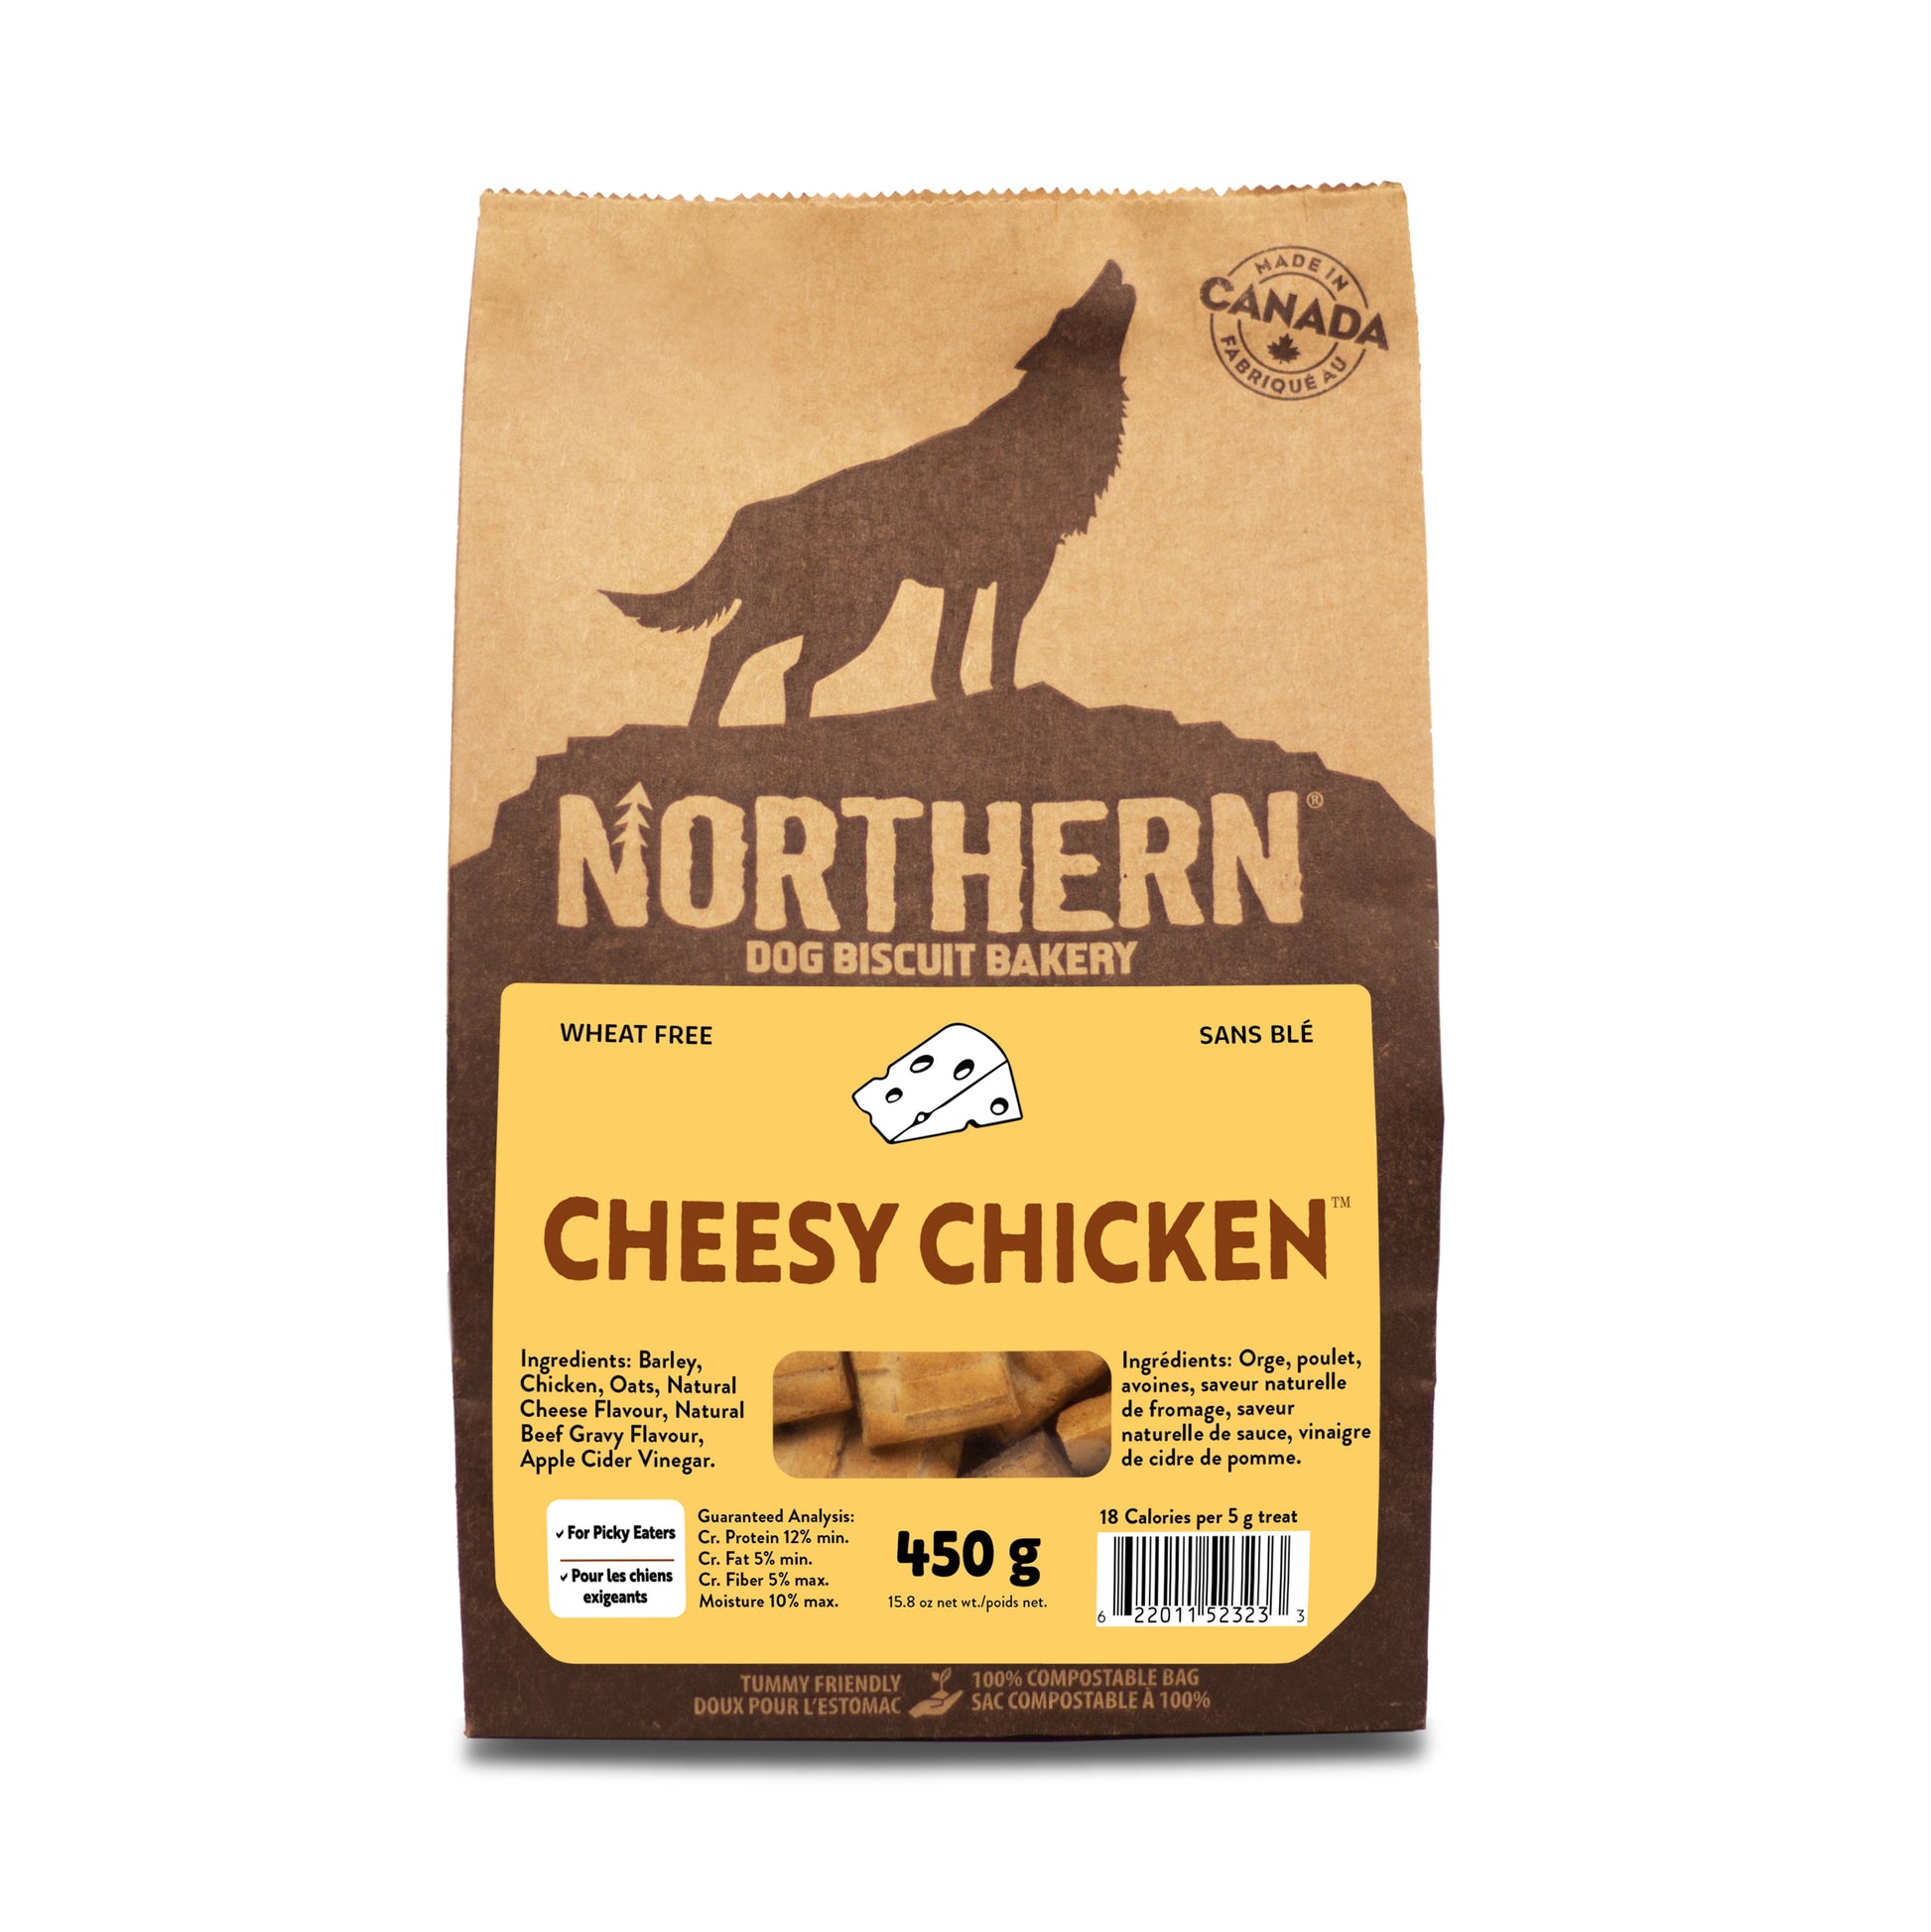 Cheesy Chicken dog biscuit-yellow label-product photo with front view